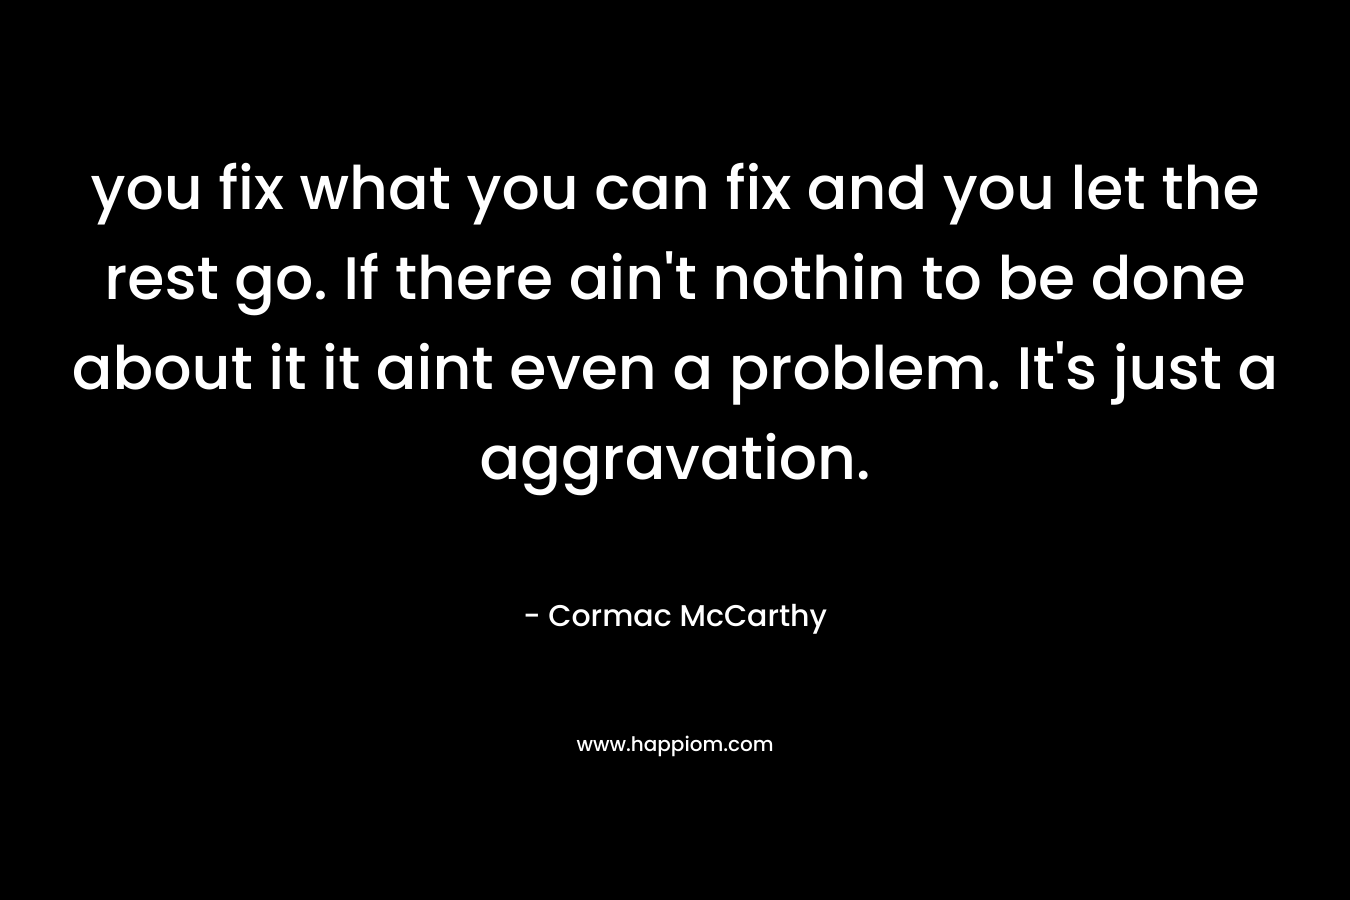 you fix what you can fix and you let the rest go. If there ain’t nothin to be done about it it aint even a problem. It’s just a aggravation. – Cormac McCarthy